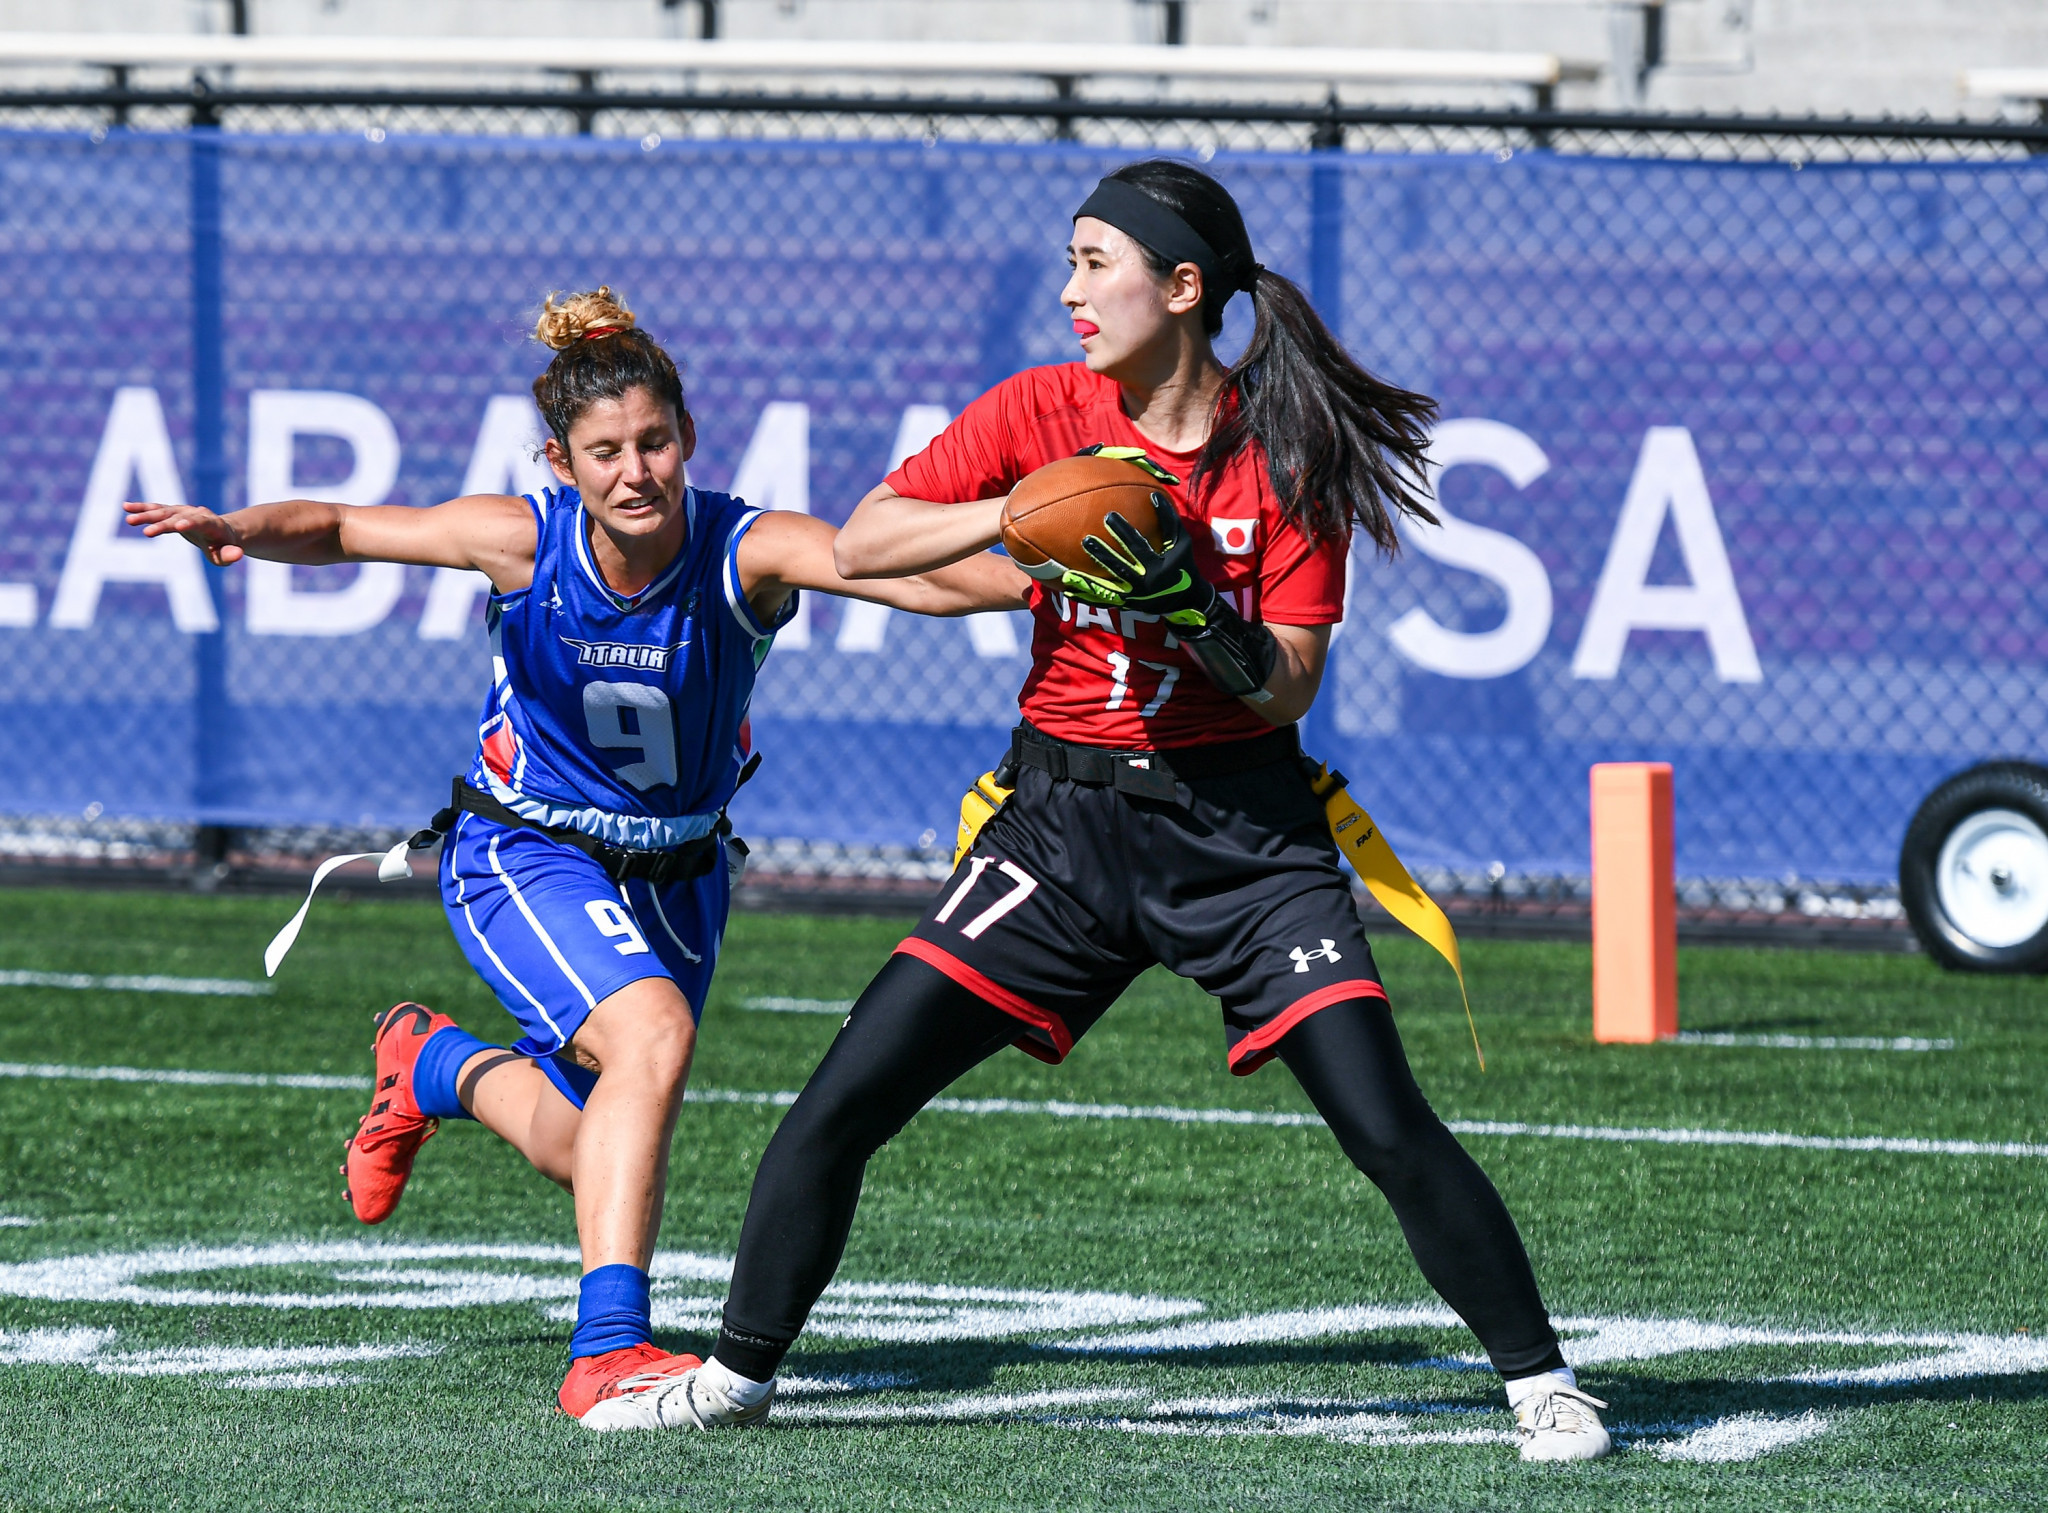 Flag football's popularity with women is hoped to help it achieve Olympic inclusion ©IFAF